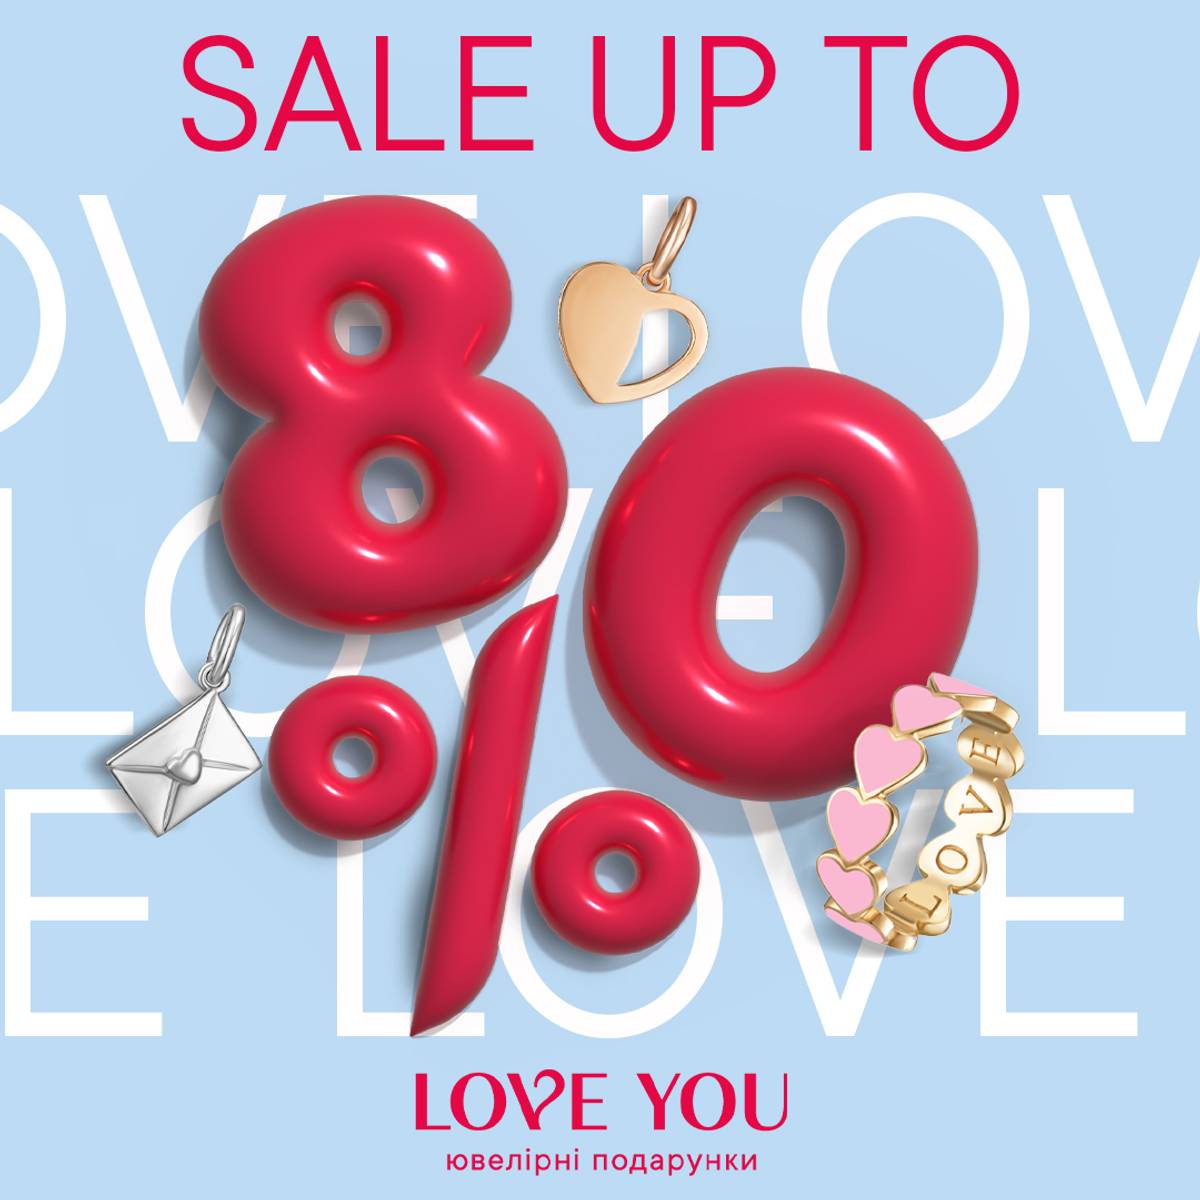 LOVE SALE UP TO -80%